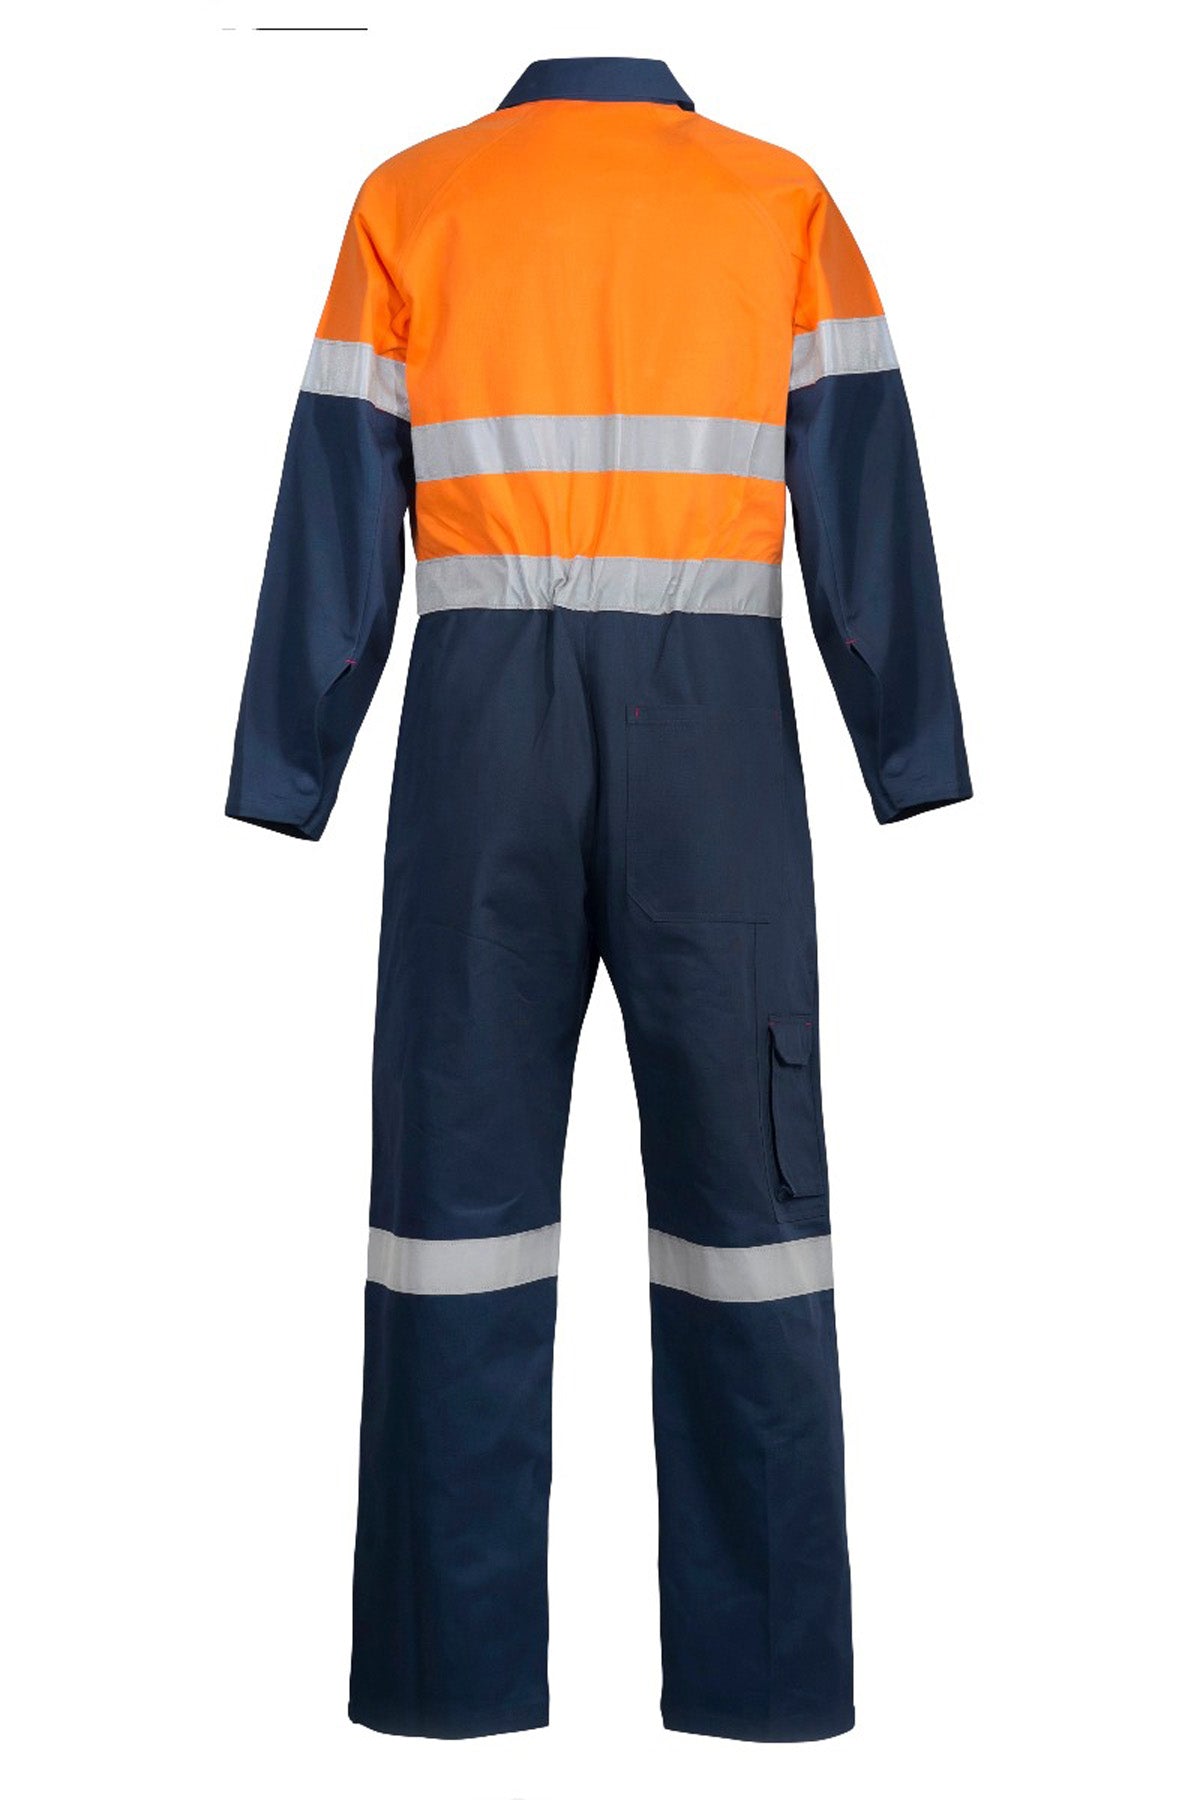 Workcraft WC6093 Hi-vis Two Tone Cotton Drill Coveralls With CSR Reflective Tape